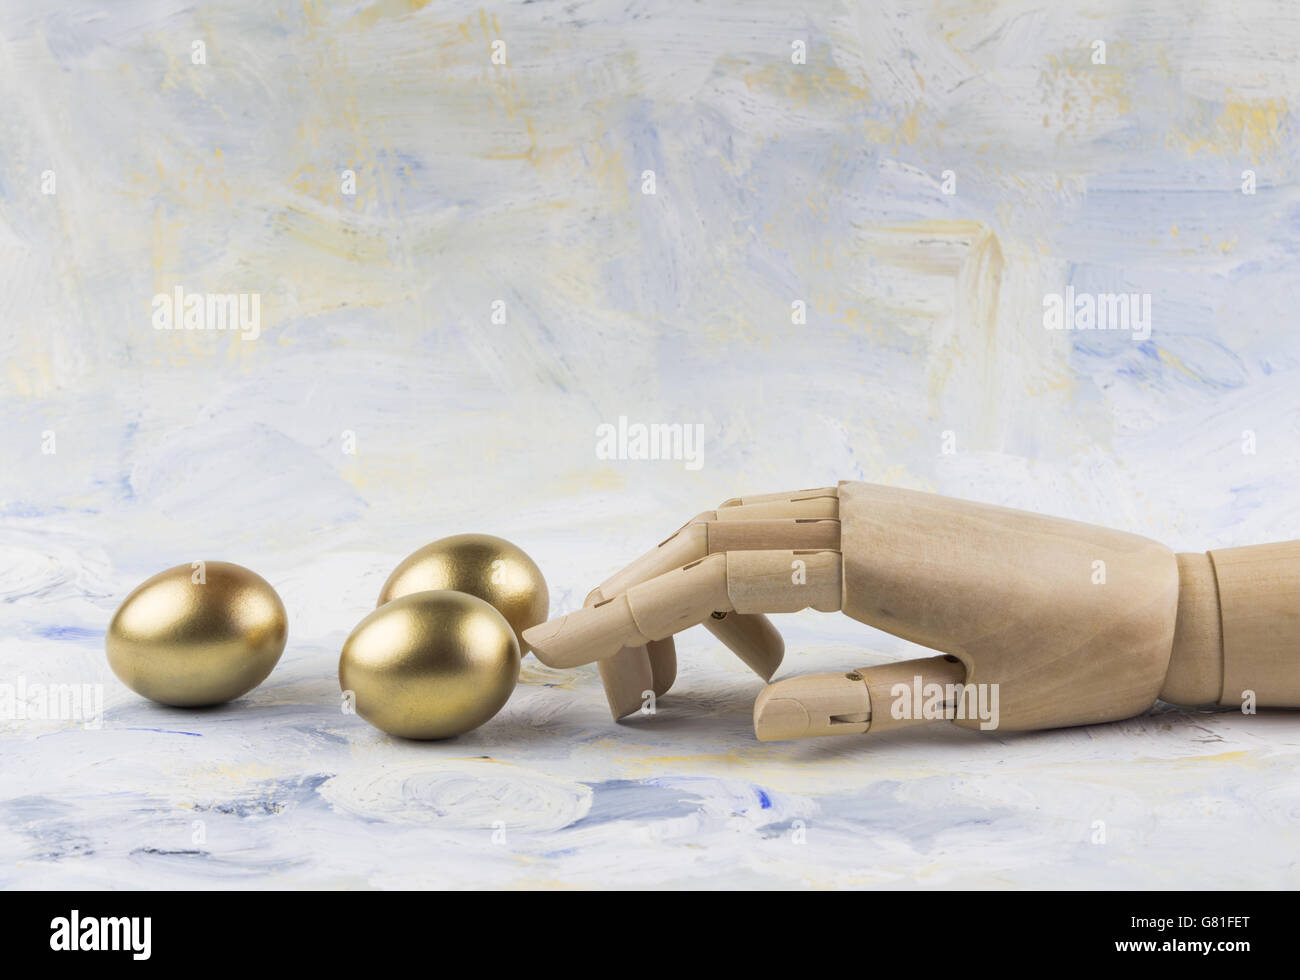 Three golden eggs touched by wooden puppet finger against painted sky background Stock Photo